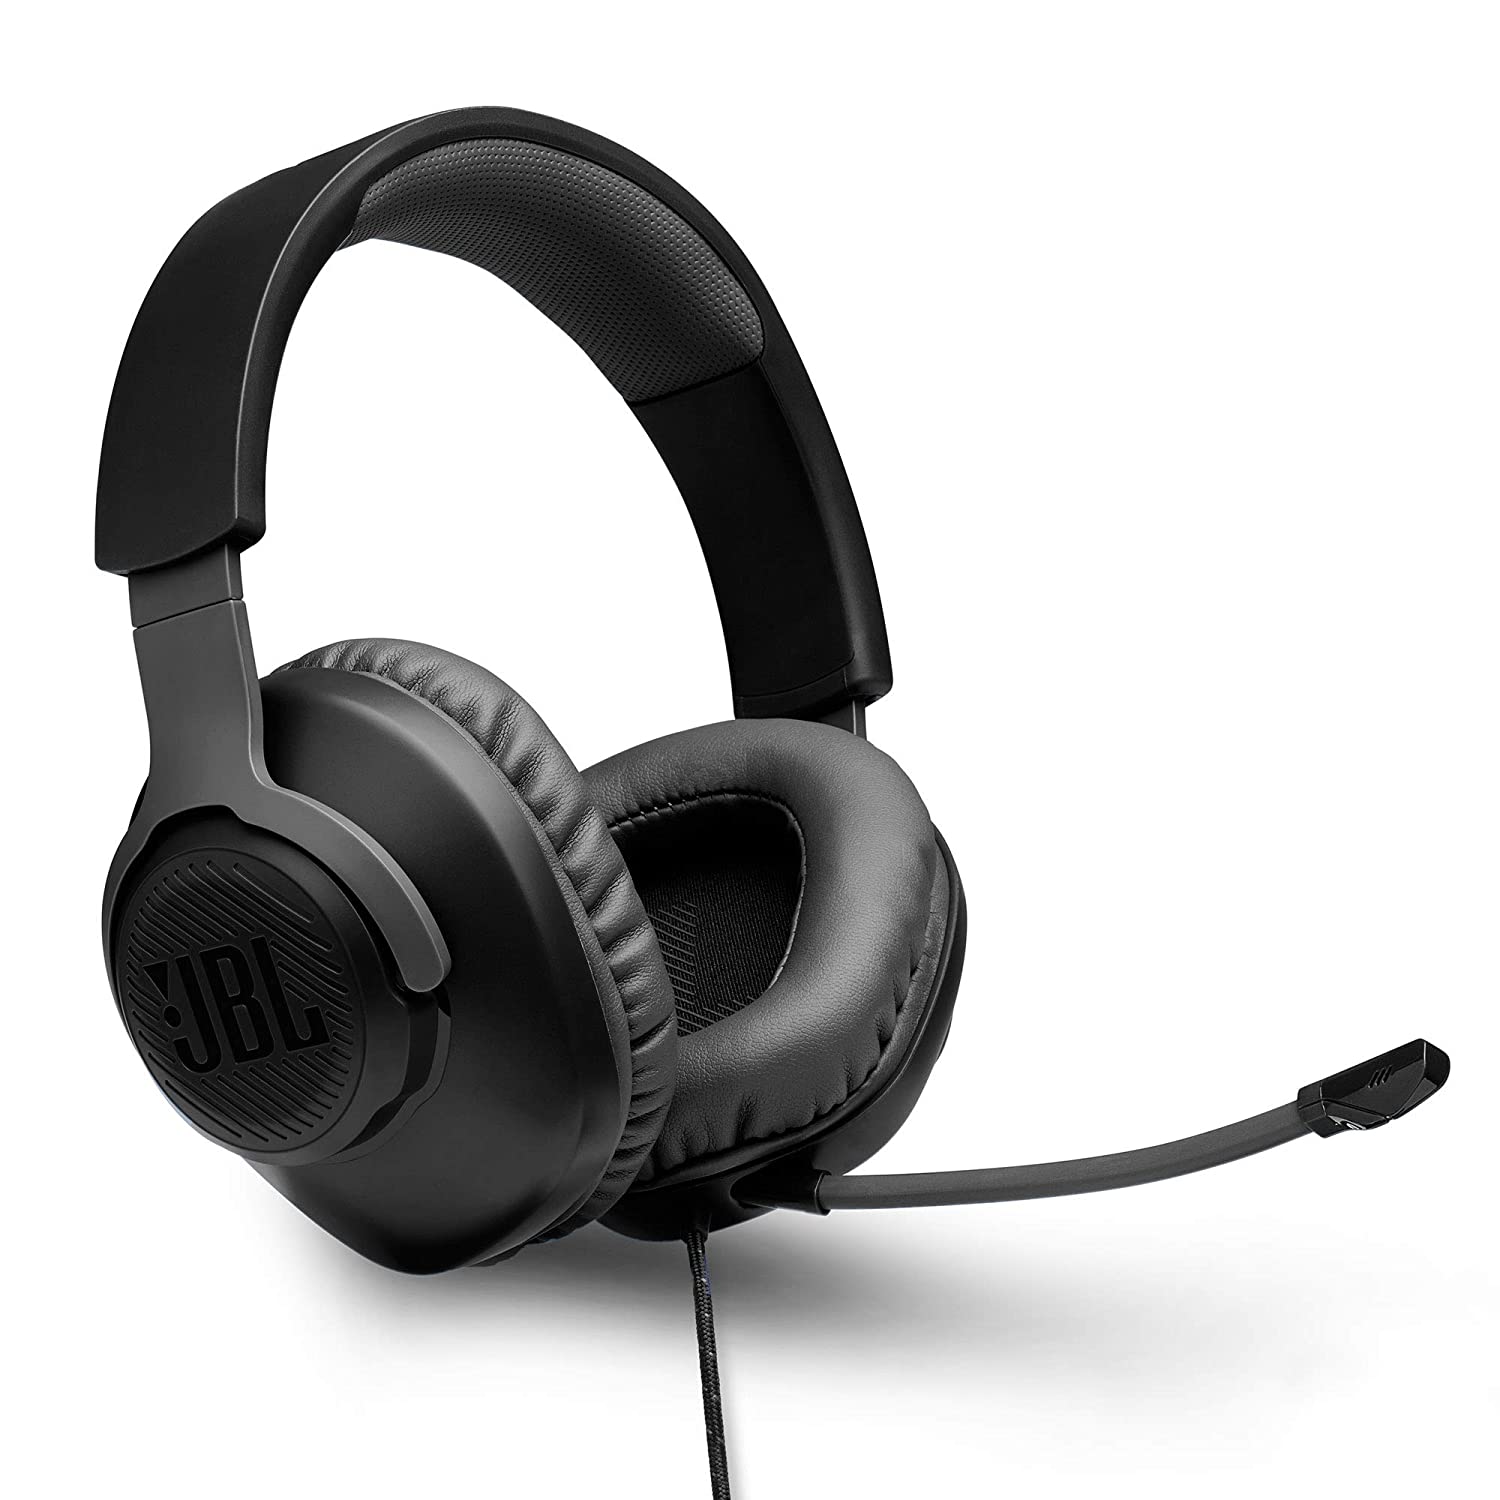 JBL Quantum 100, Wired Over Ear Gaming Headphones with mic for PC, Mobile, Laptop, PS4, Xbox, Nintendo Switch, VR (Black)